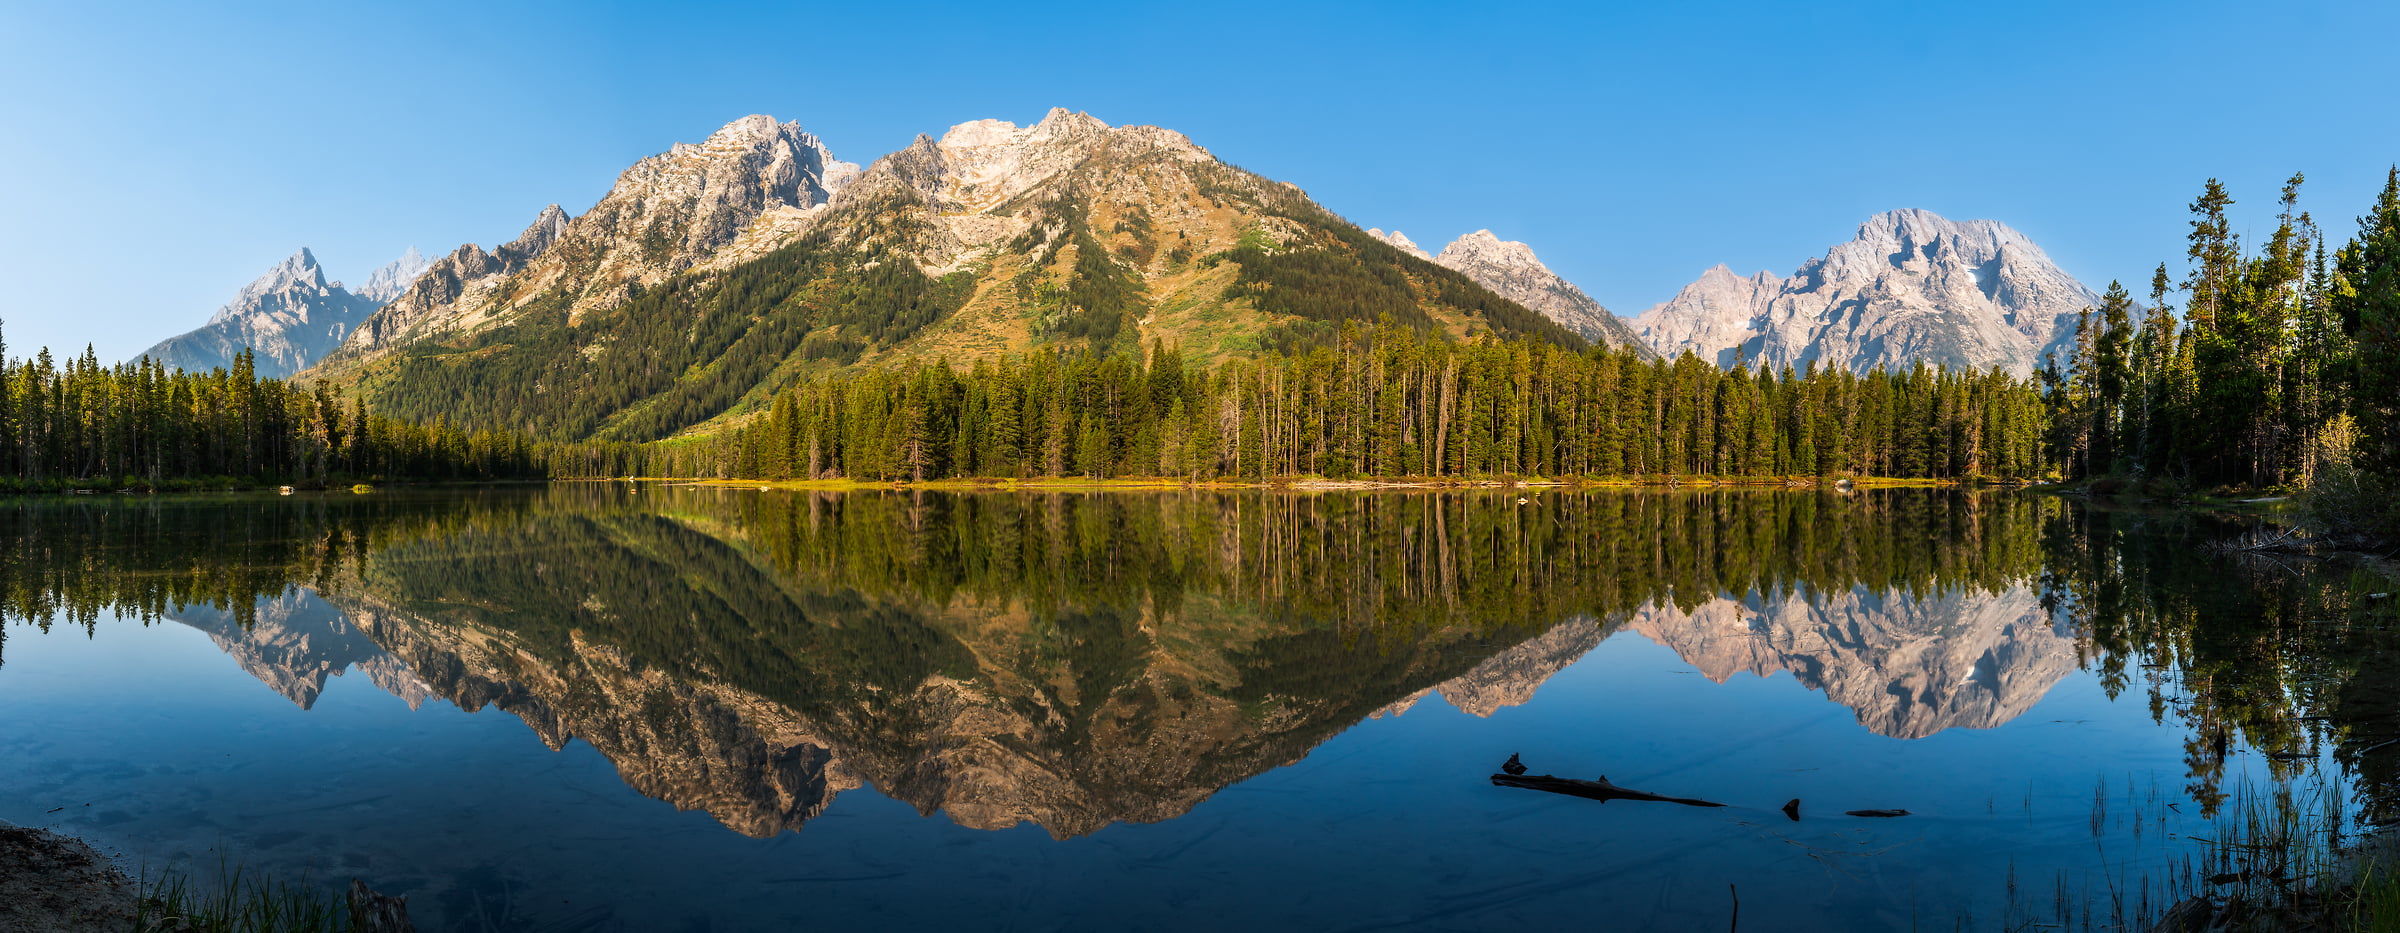 141 megapixels! A very high resolution, large-format VAST photo print of a lake in front of mountains; landscape photograph created by Phillip Noll in Grand Teton National Park, Wyoming.